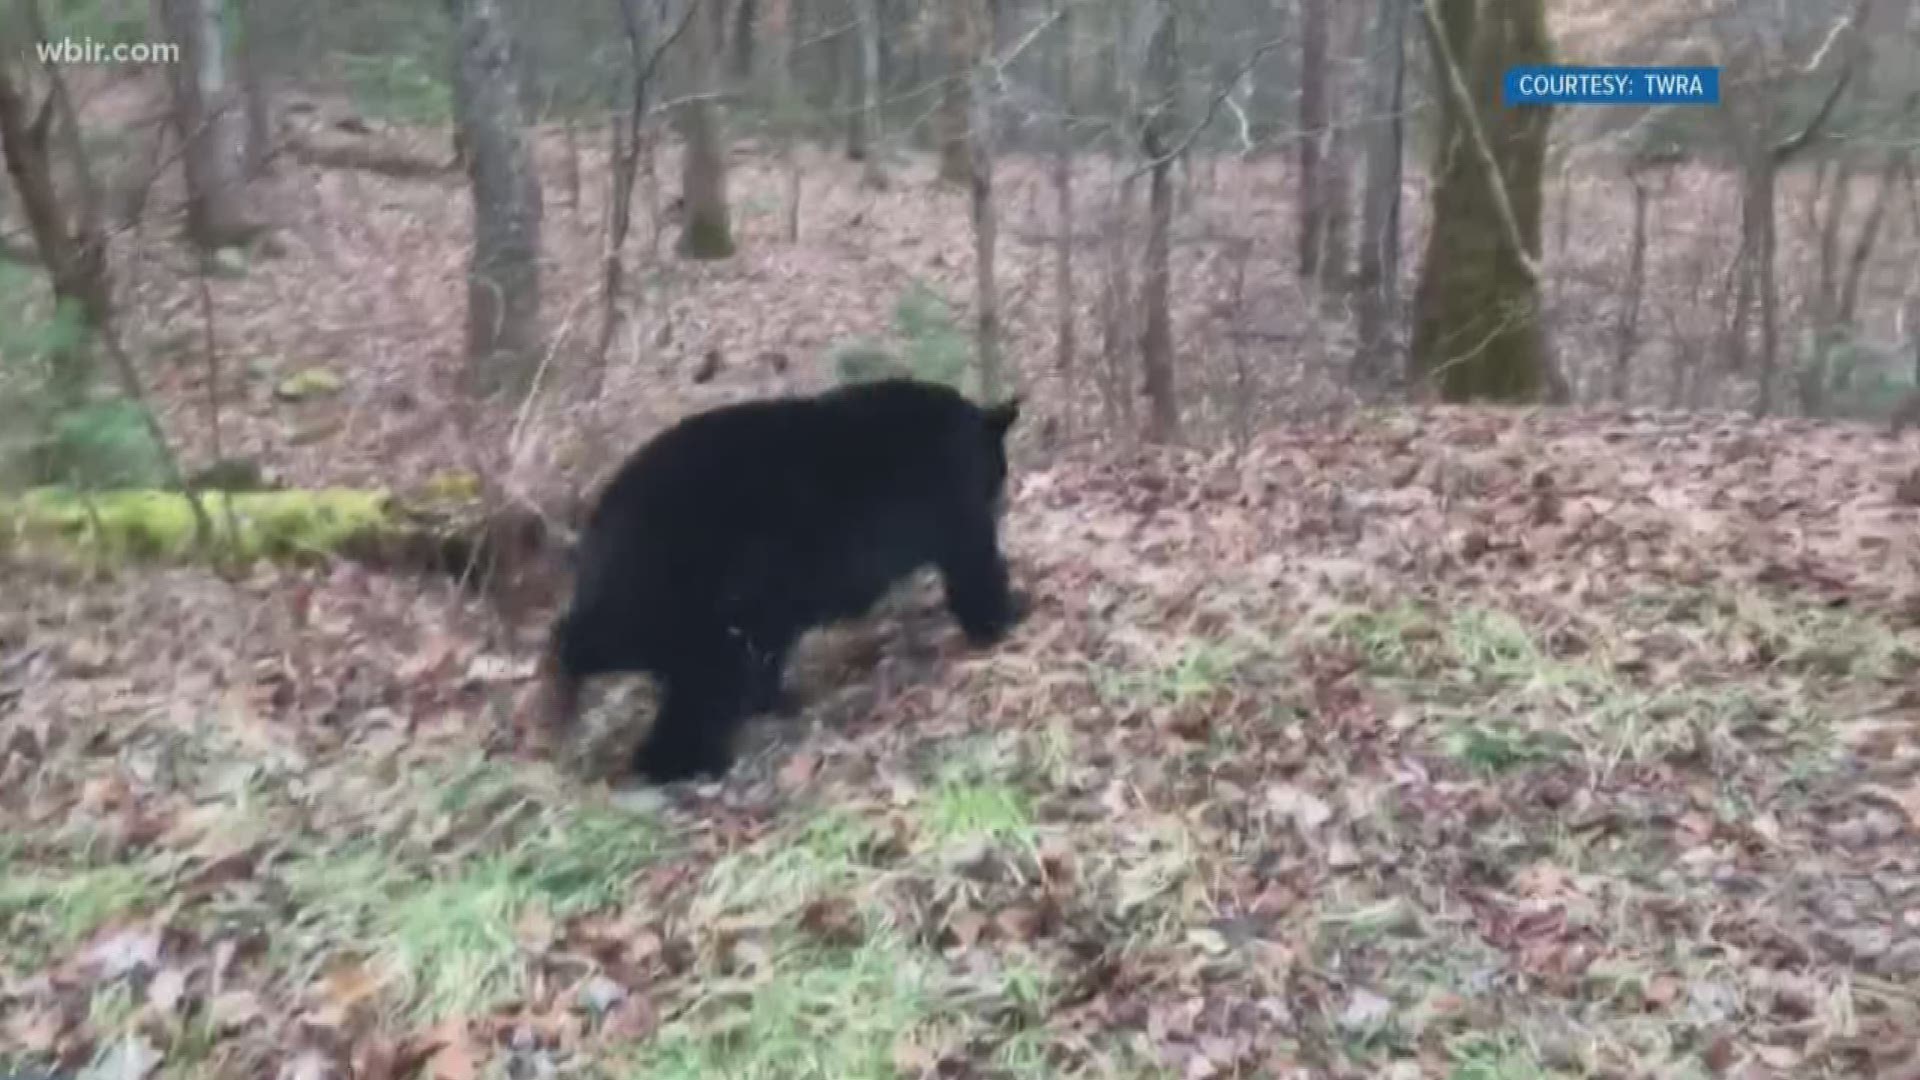 Wildlife officers and UT Police were able to safely and quickly tranquilize the bear.